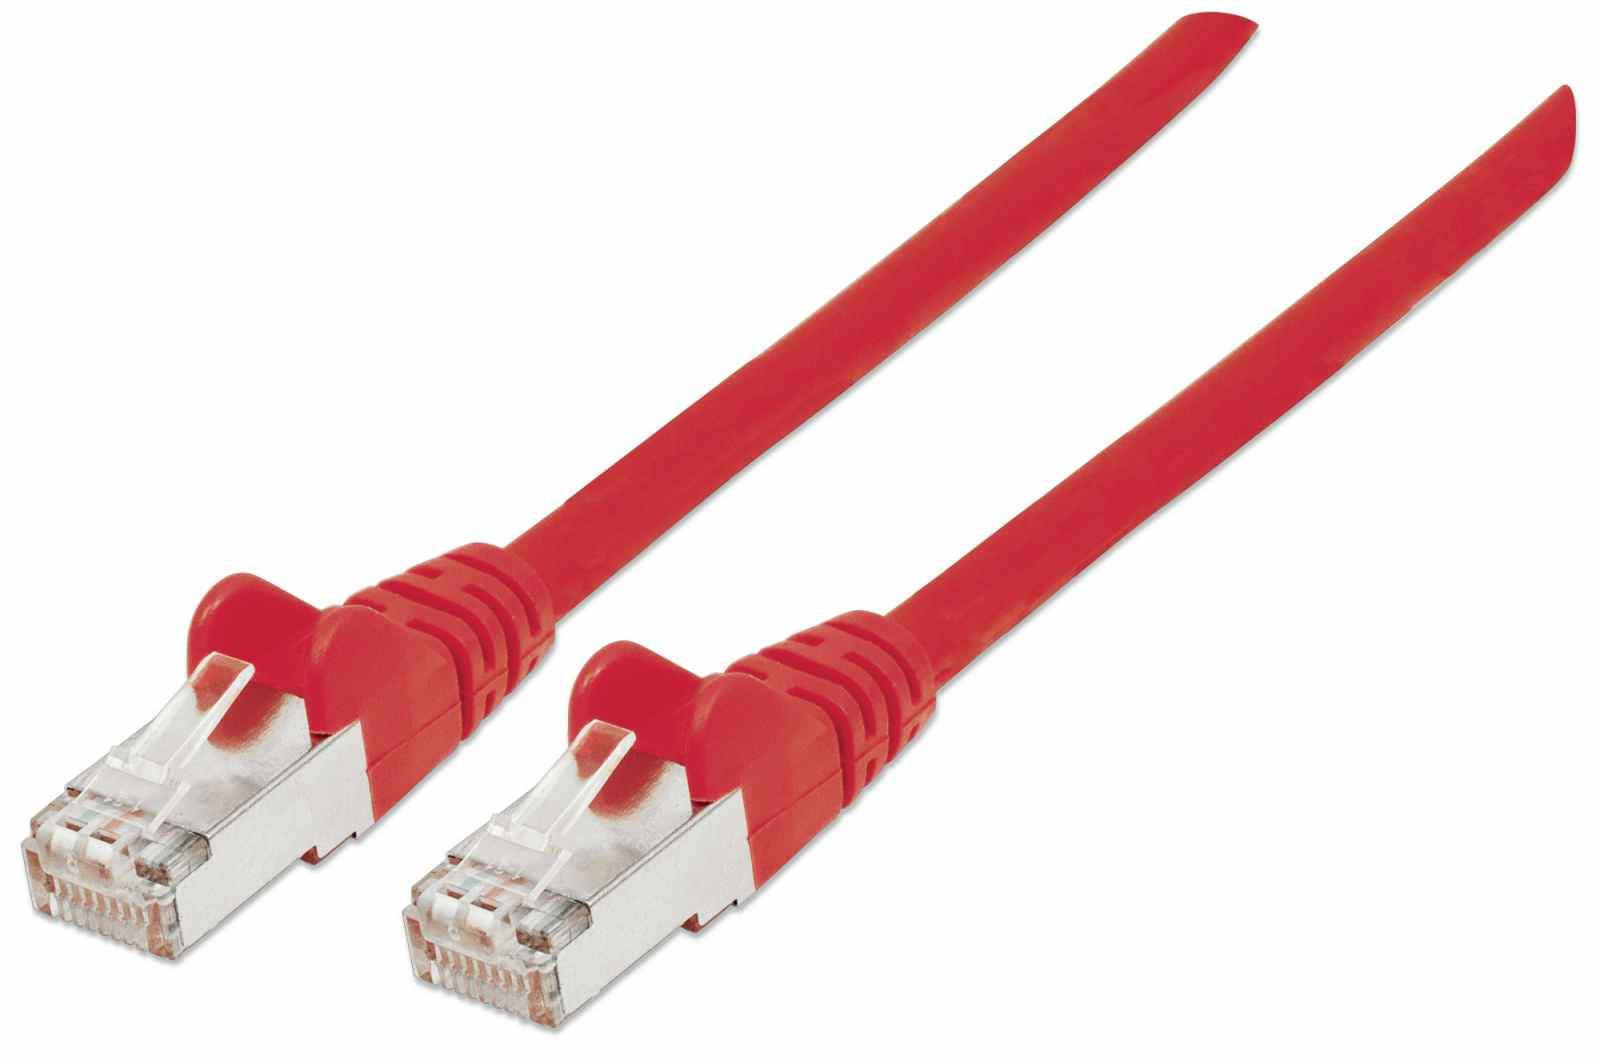 Intellinet Network Patch Cable, Cat7 Cable/Cat6A Plugs, 0.25m, Red, Copper, S/FTP, LSOH / LSZH, PVC, RJ45, Gold Plated Contacts, Snagless, Booted, Lifetime Warranty, Polybag